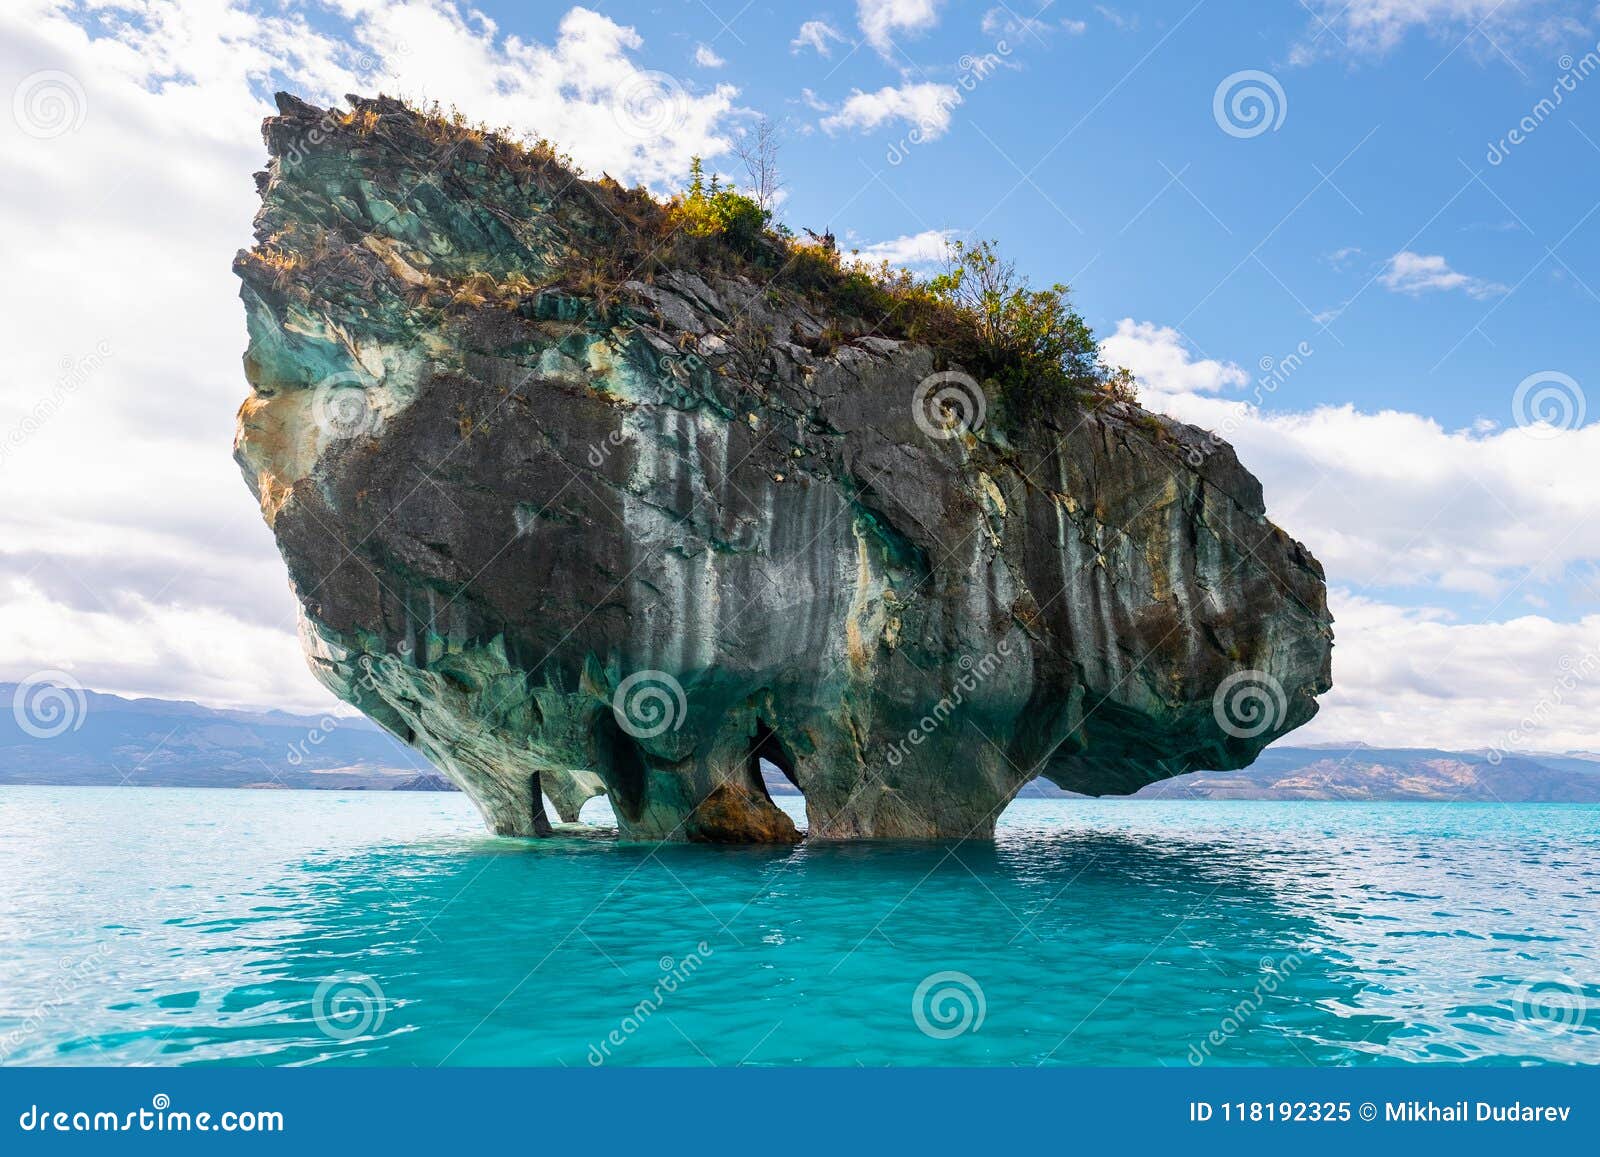 marble rock on the lake of general carrera